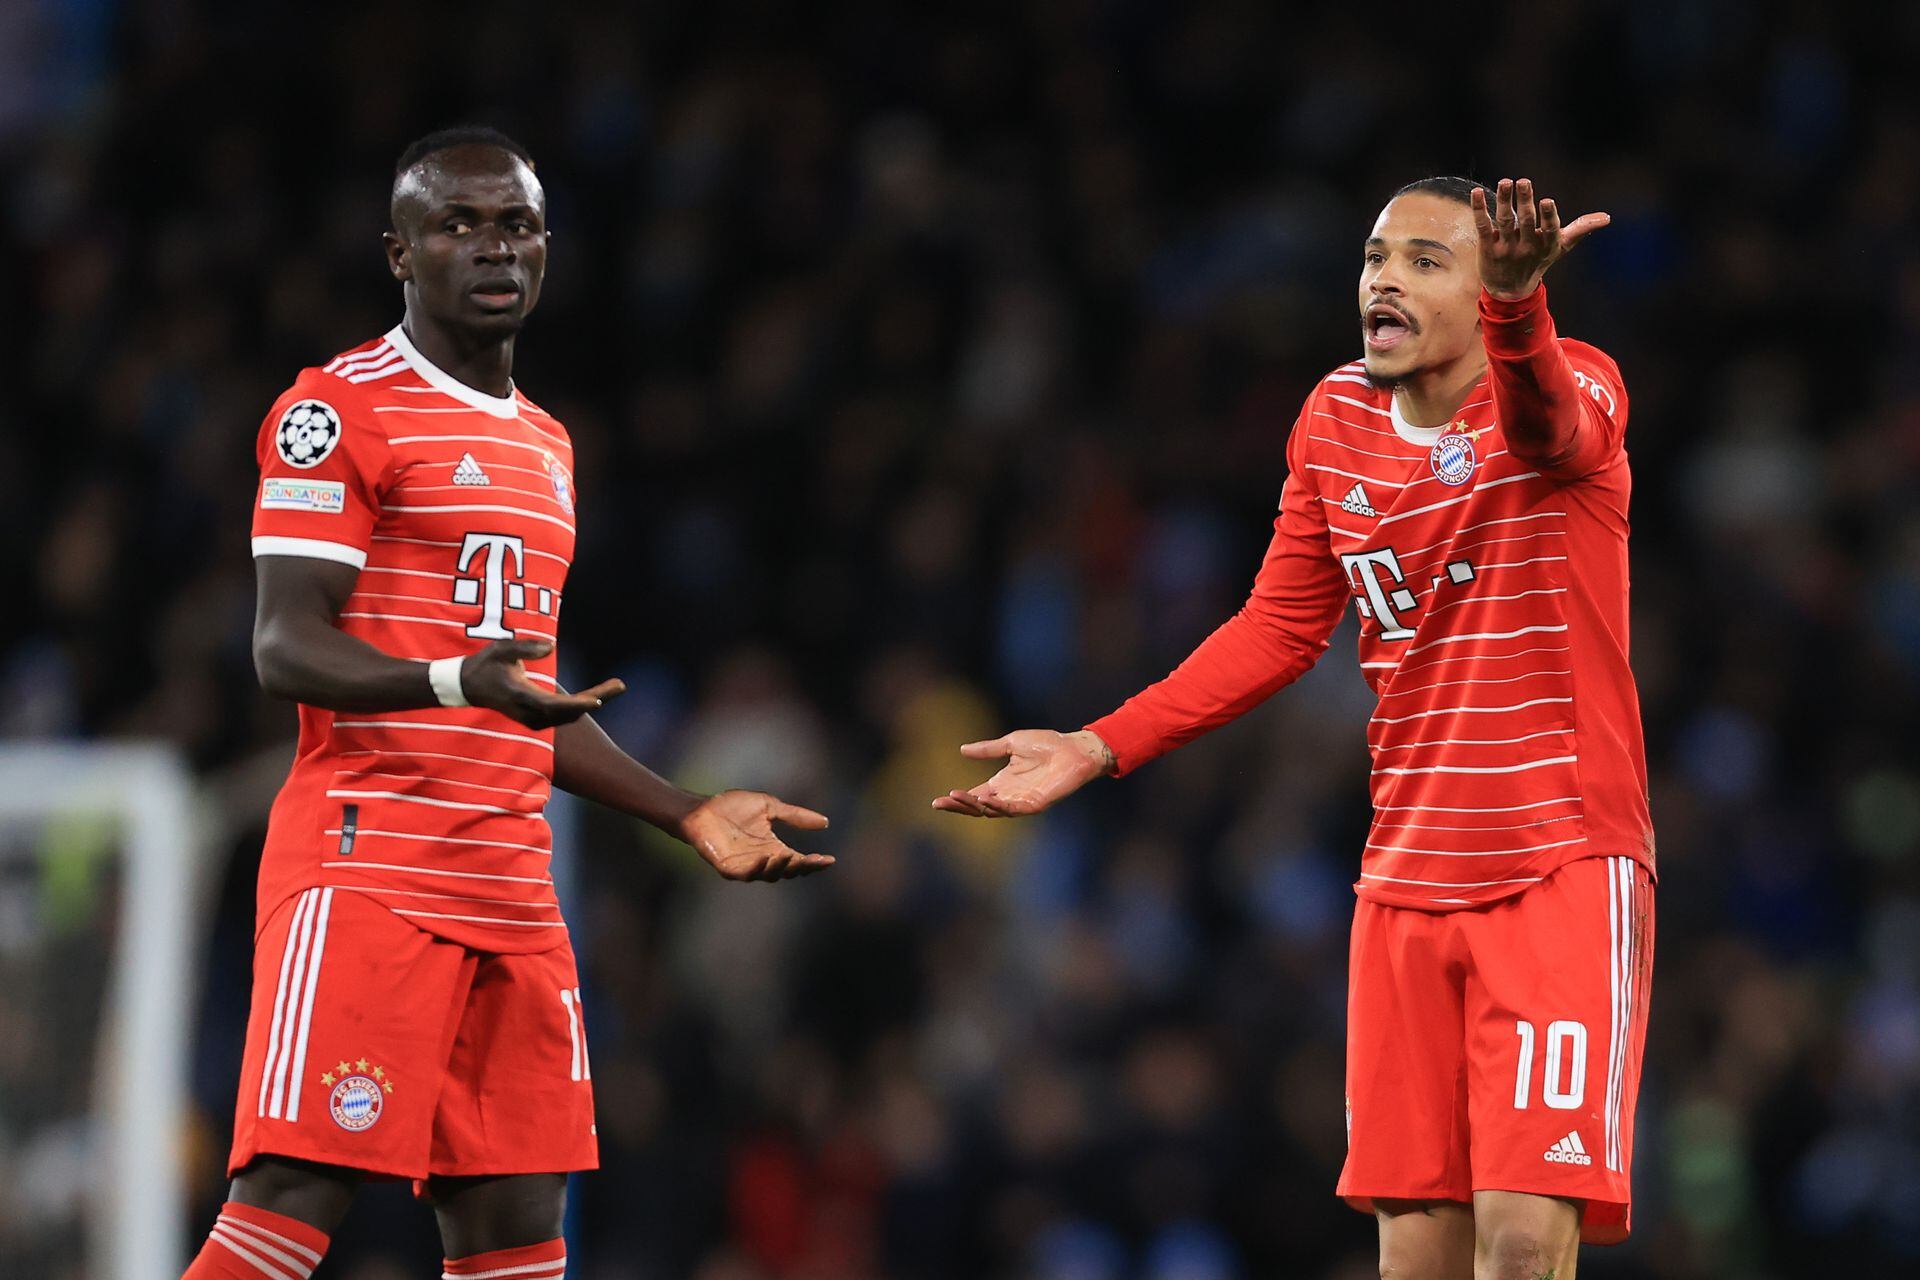 MANCHESTER, ENGLAND - APRIL 11: Leroy Sane of Bayern Munich and Sadio Mane of Bayern Munich moan at each other during the UEFA Champions League quarterfinal first leg match between Manchester City and FC Bayern München at Etihad Stadium on April 11, 2023 in Manchester, United Kingdom. (Photo by Simon Stacpoole/Offside/Offside via Getty Images)